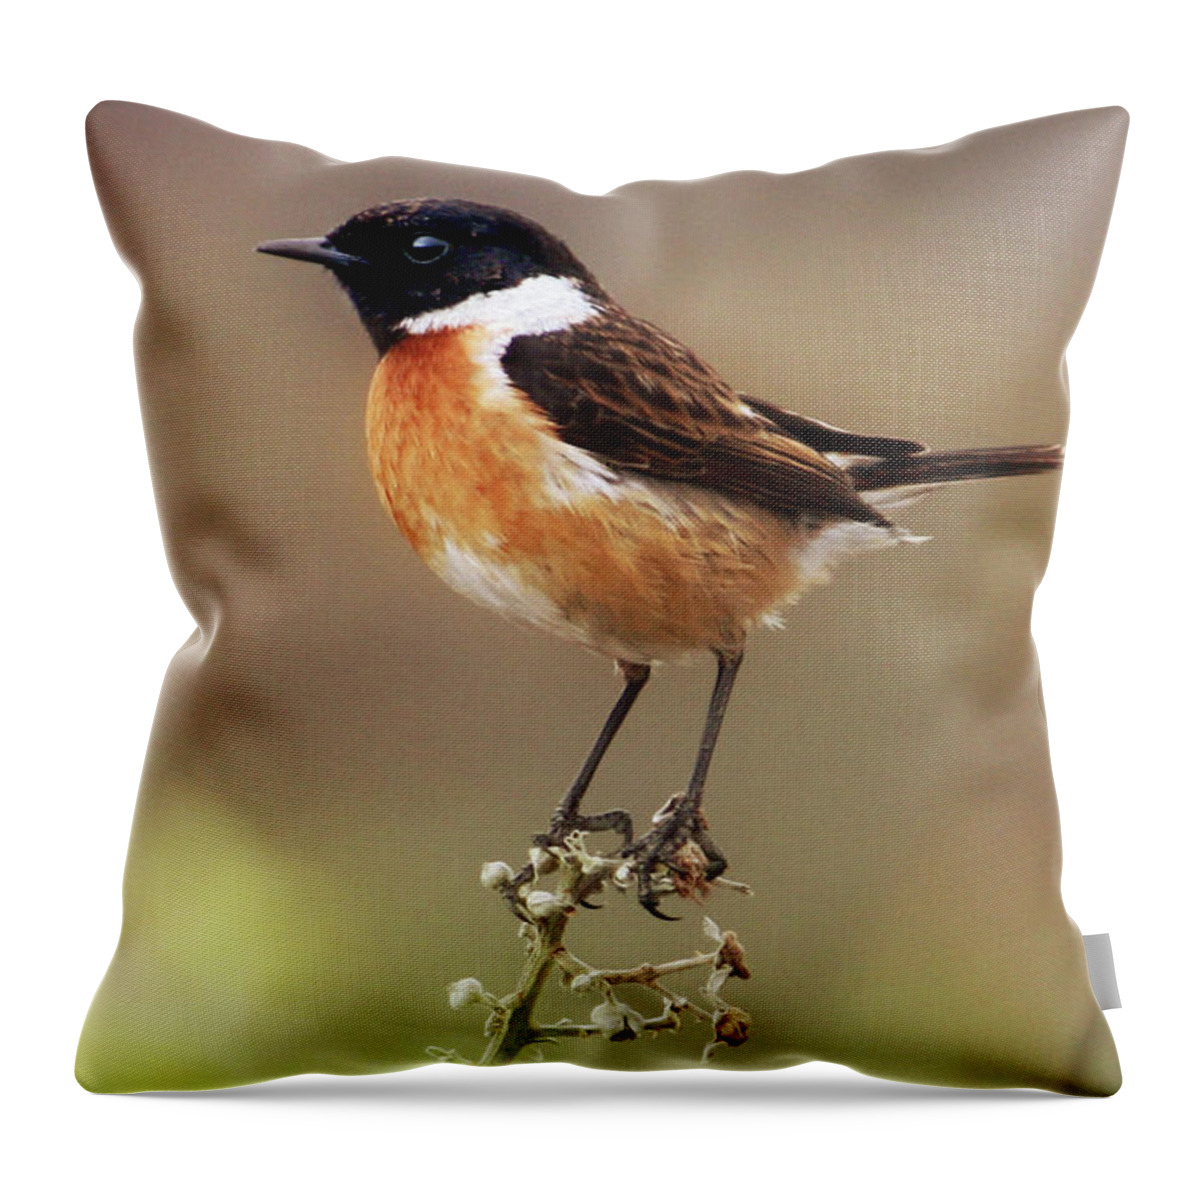 Stonechat Throw Pillow featuring the photograph Stonechat by Terri Waters